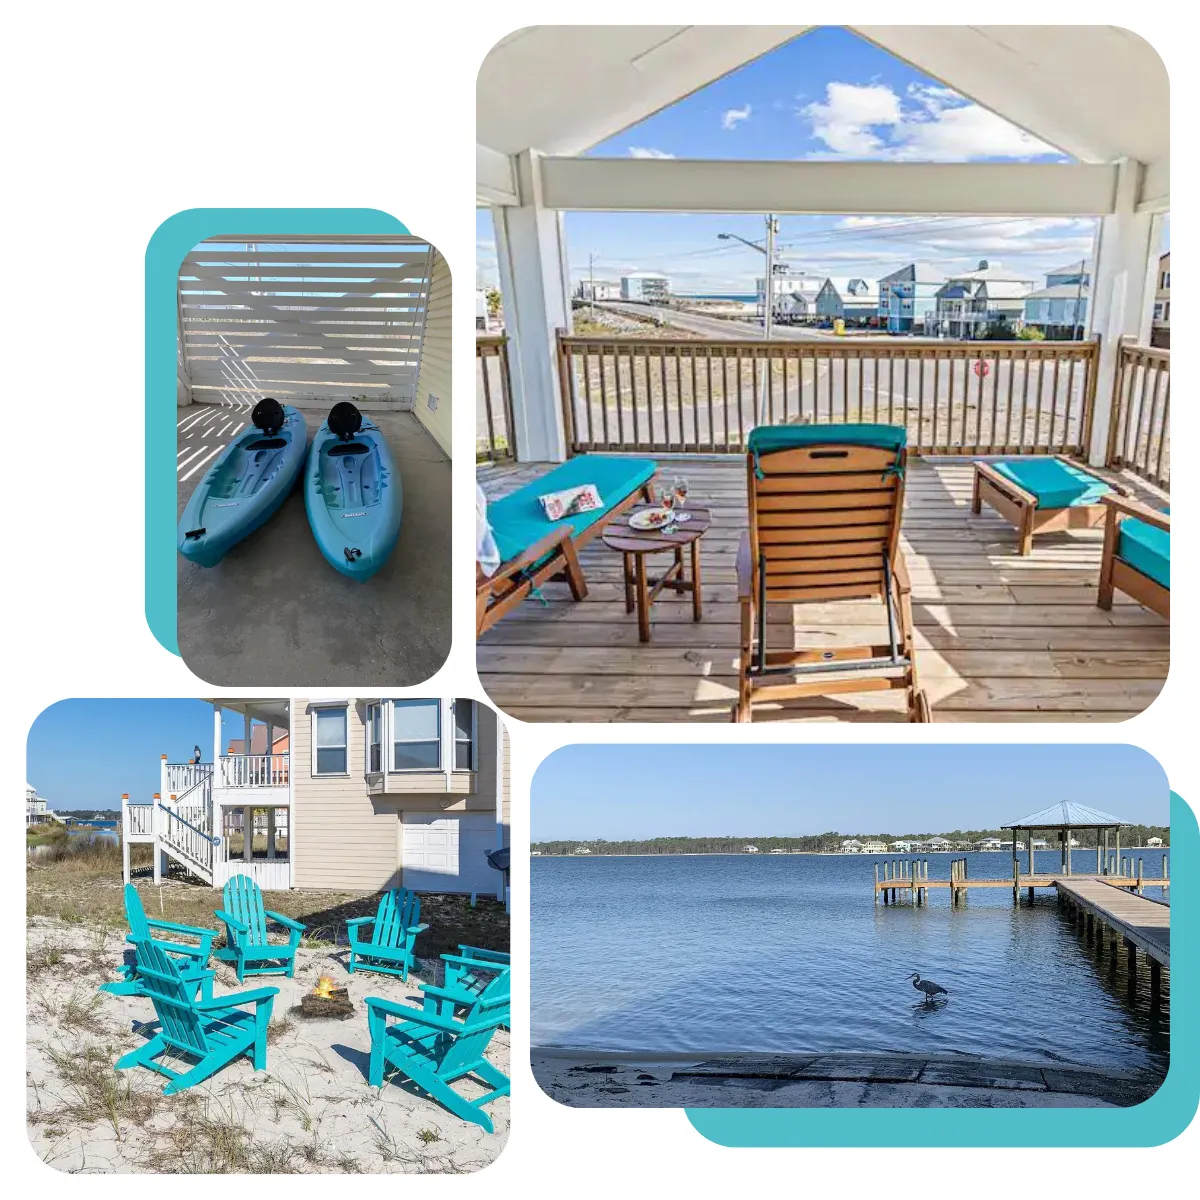 Dune Just Fine offers a cozy beach getaway with private access, boat dock, kayaks, and amenities, just steps from Gulf Shores. Book now for a relaxing stay!